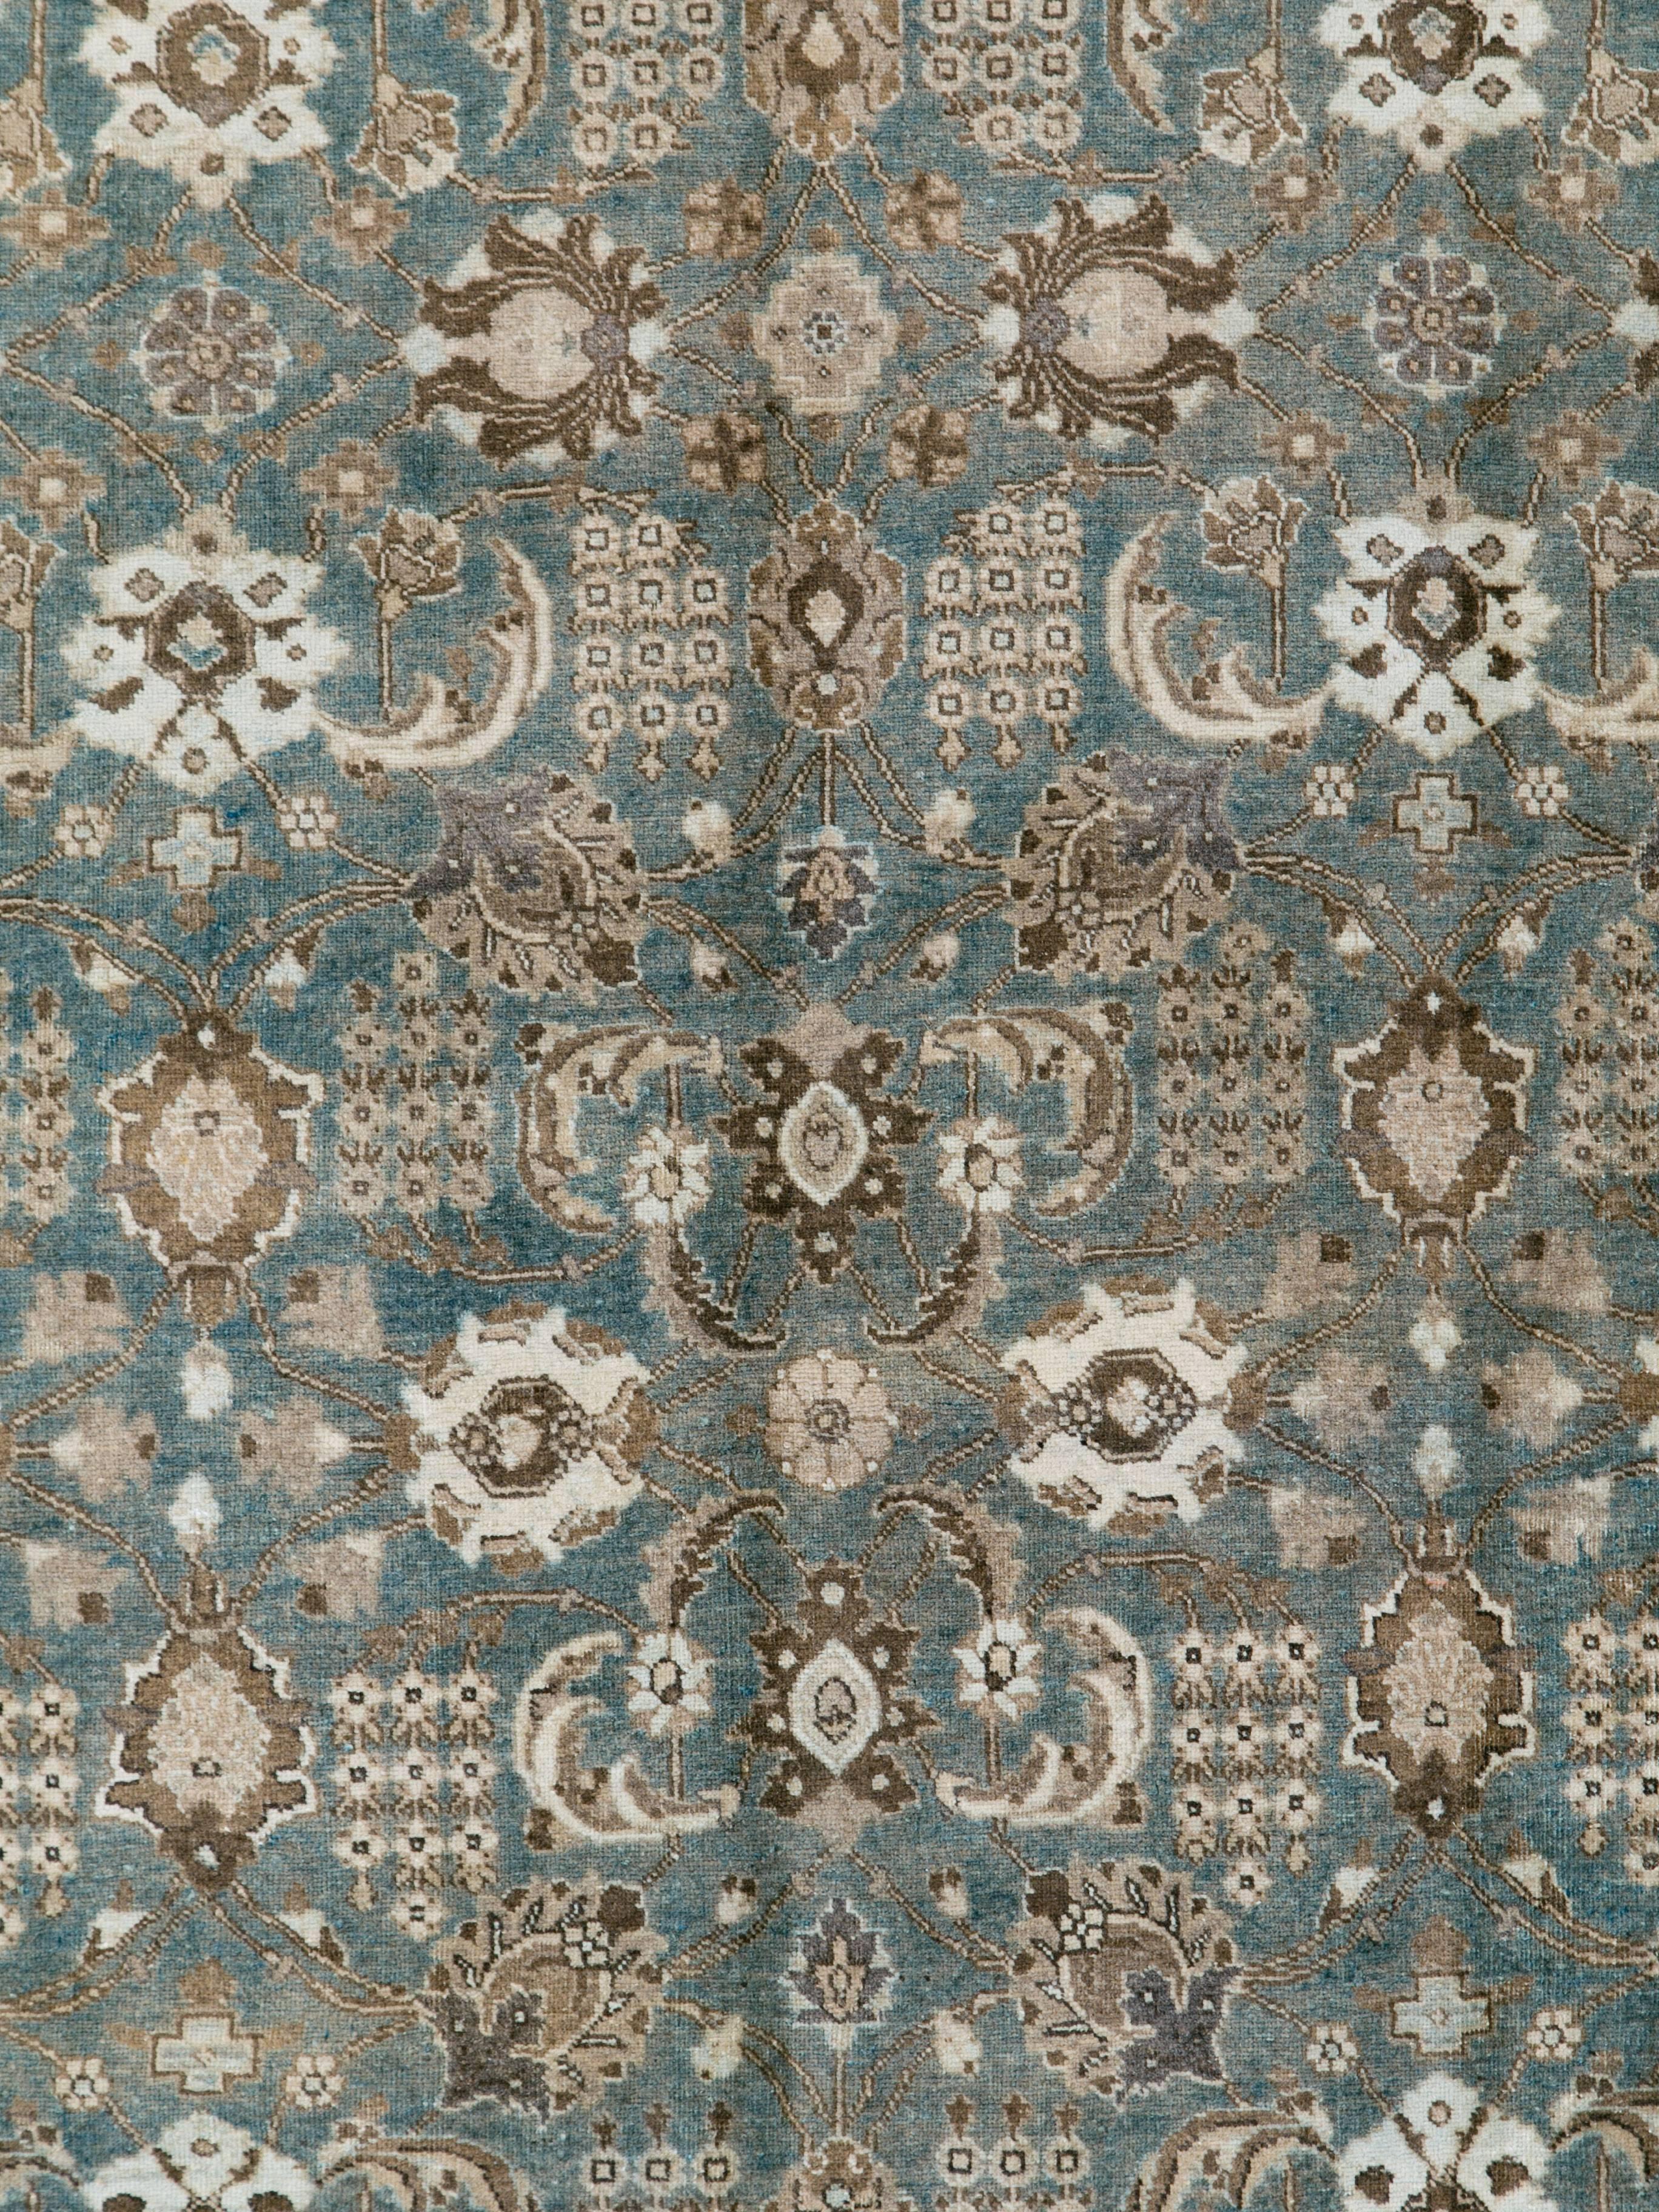 An antique Persian Tabriz rug from the second quarter of the 20th century.